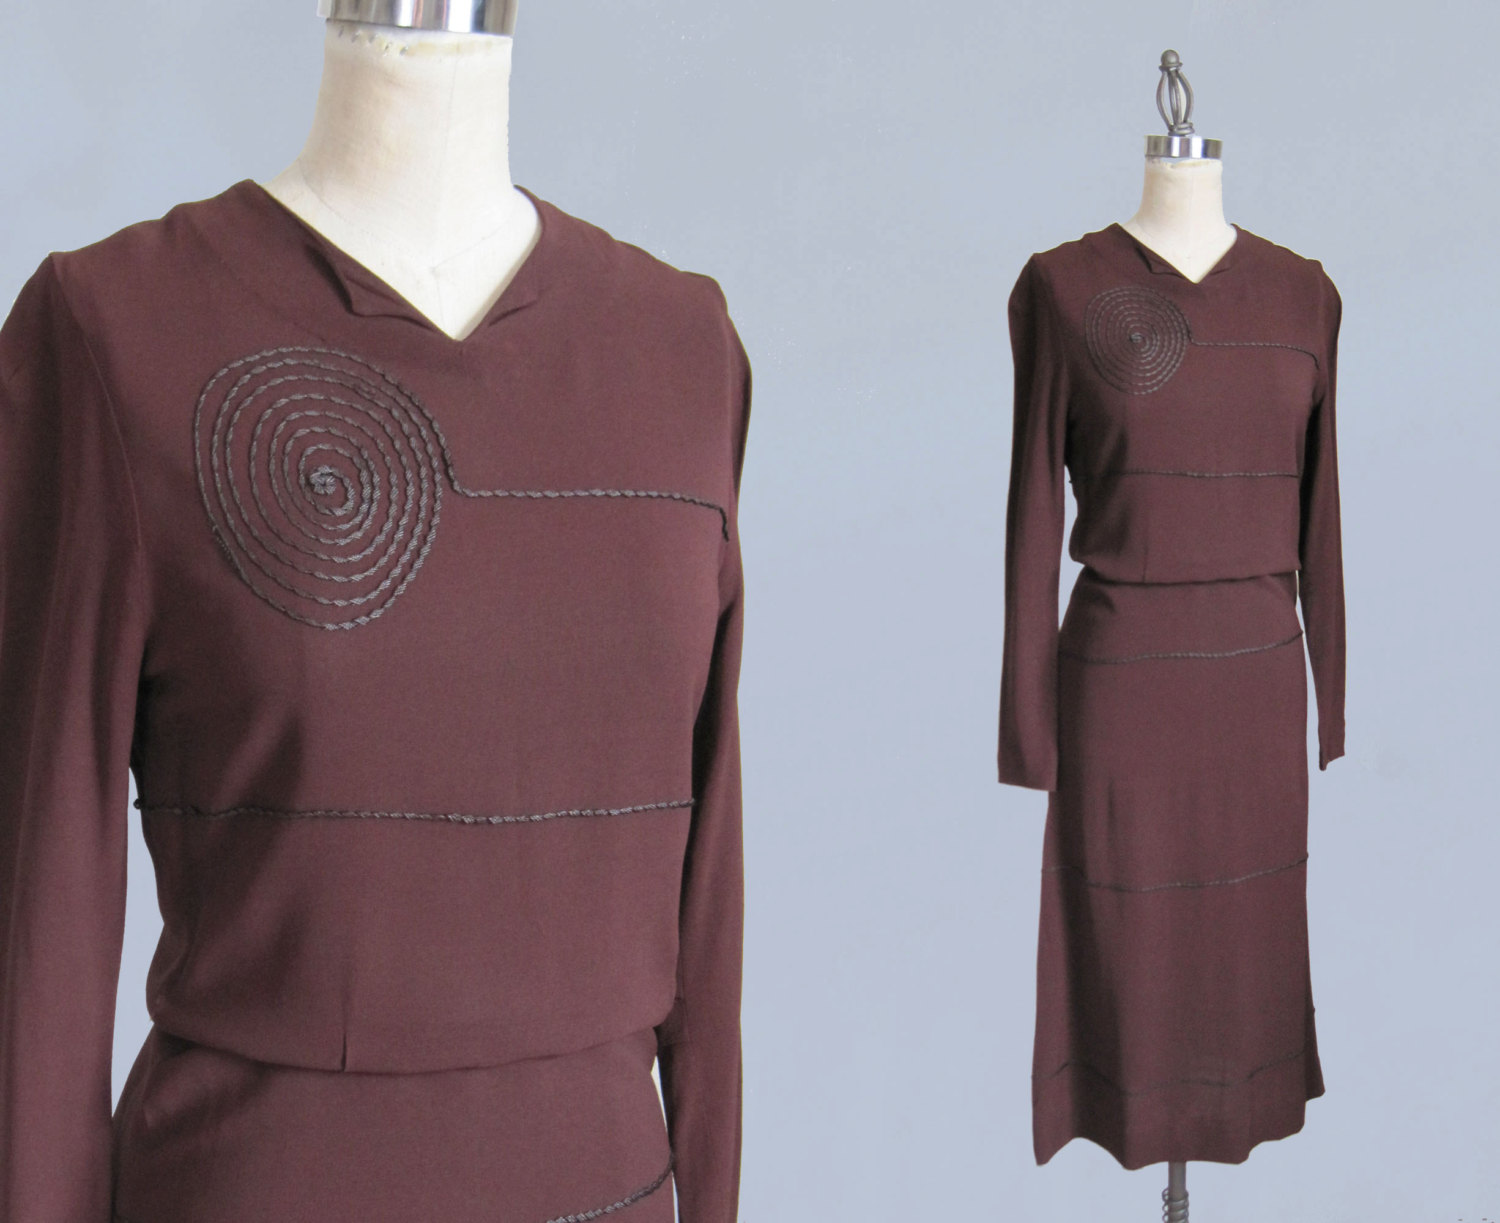 1940s Brown Rayon Crepe Dress with Beaded Satin Collar and Cuffs